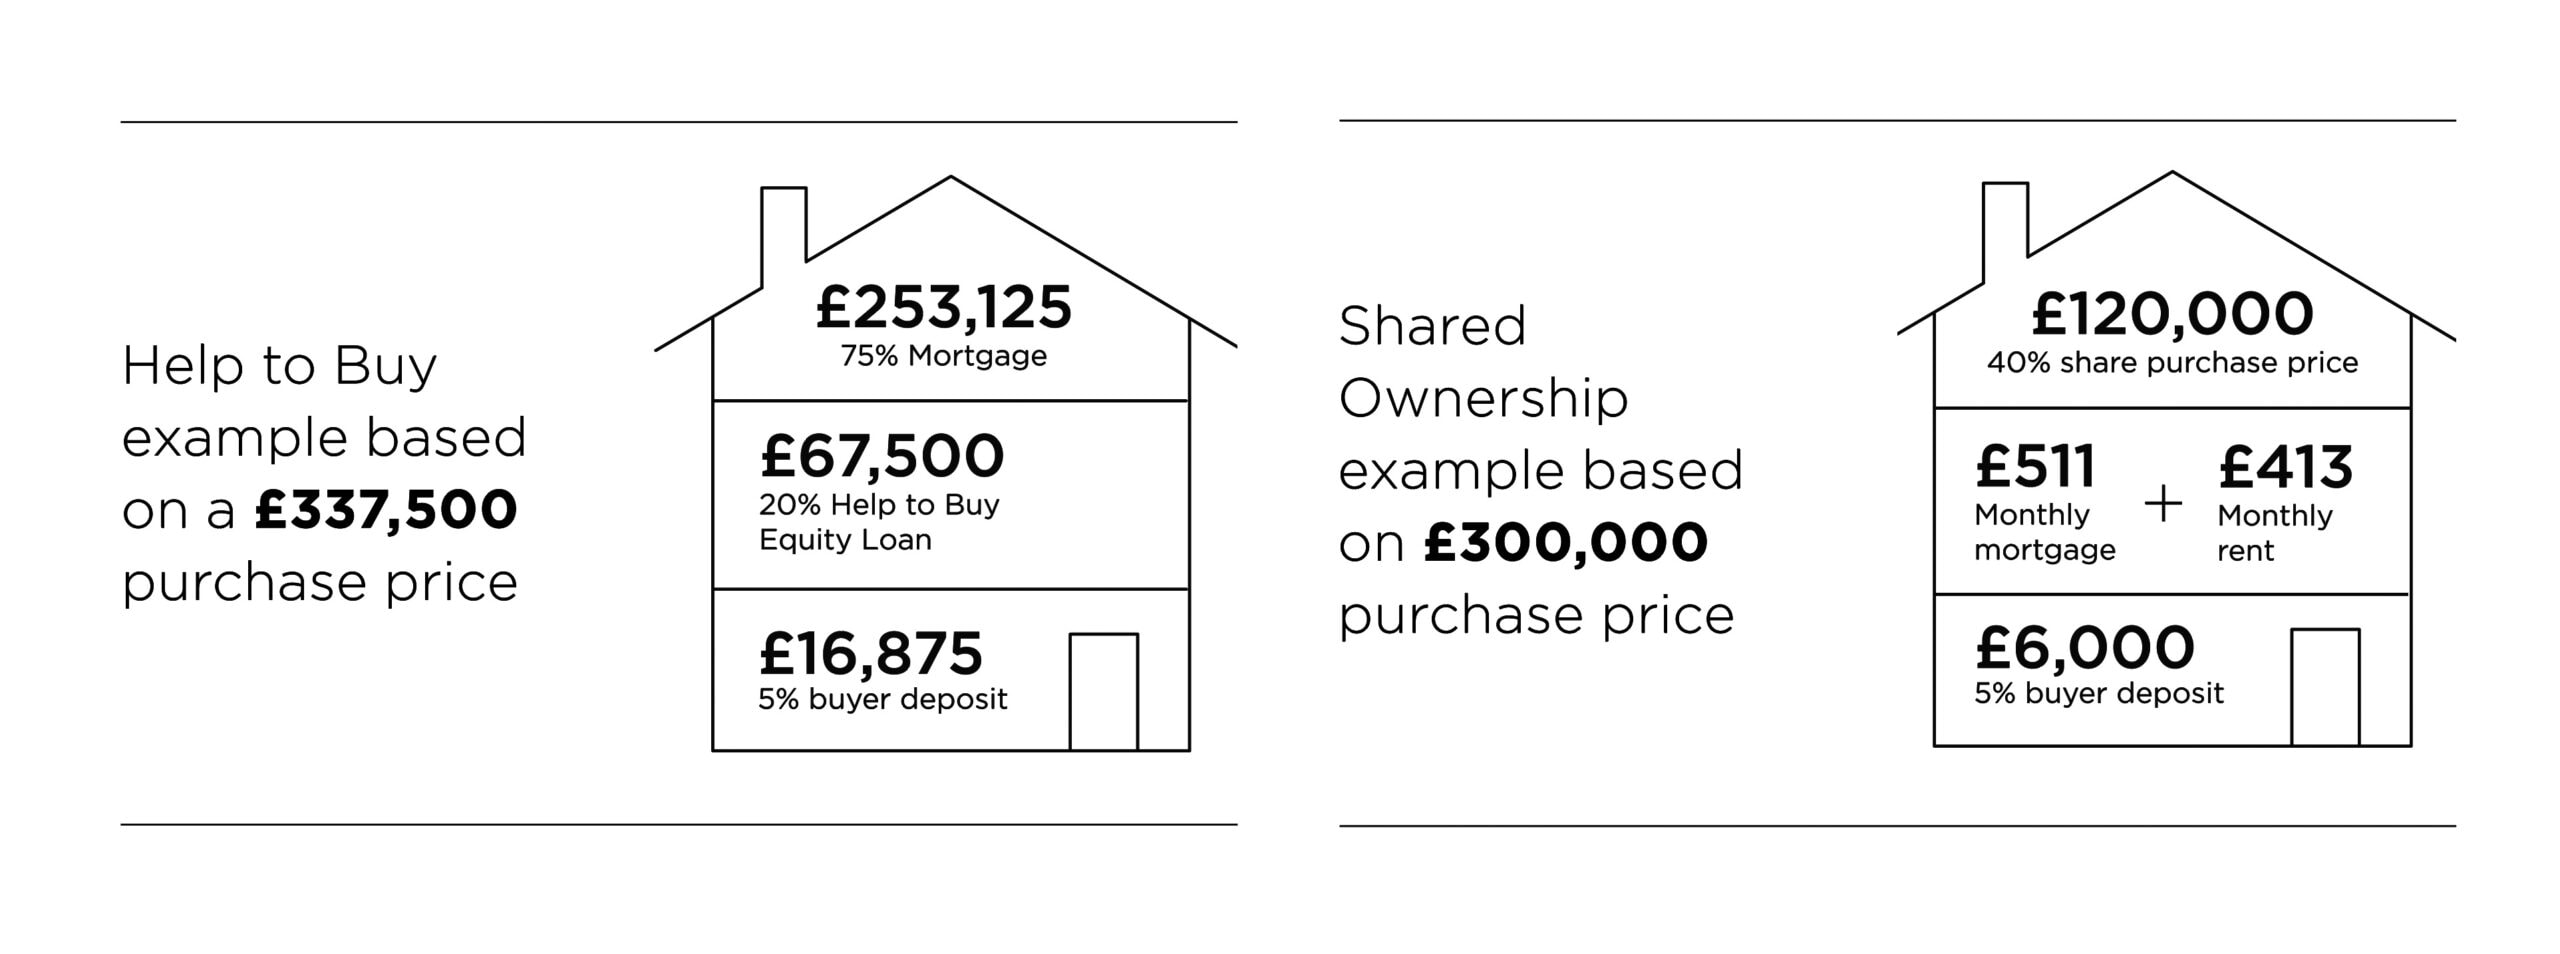 House graphic of Shared Ownership and Help to Buy pricing